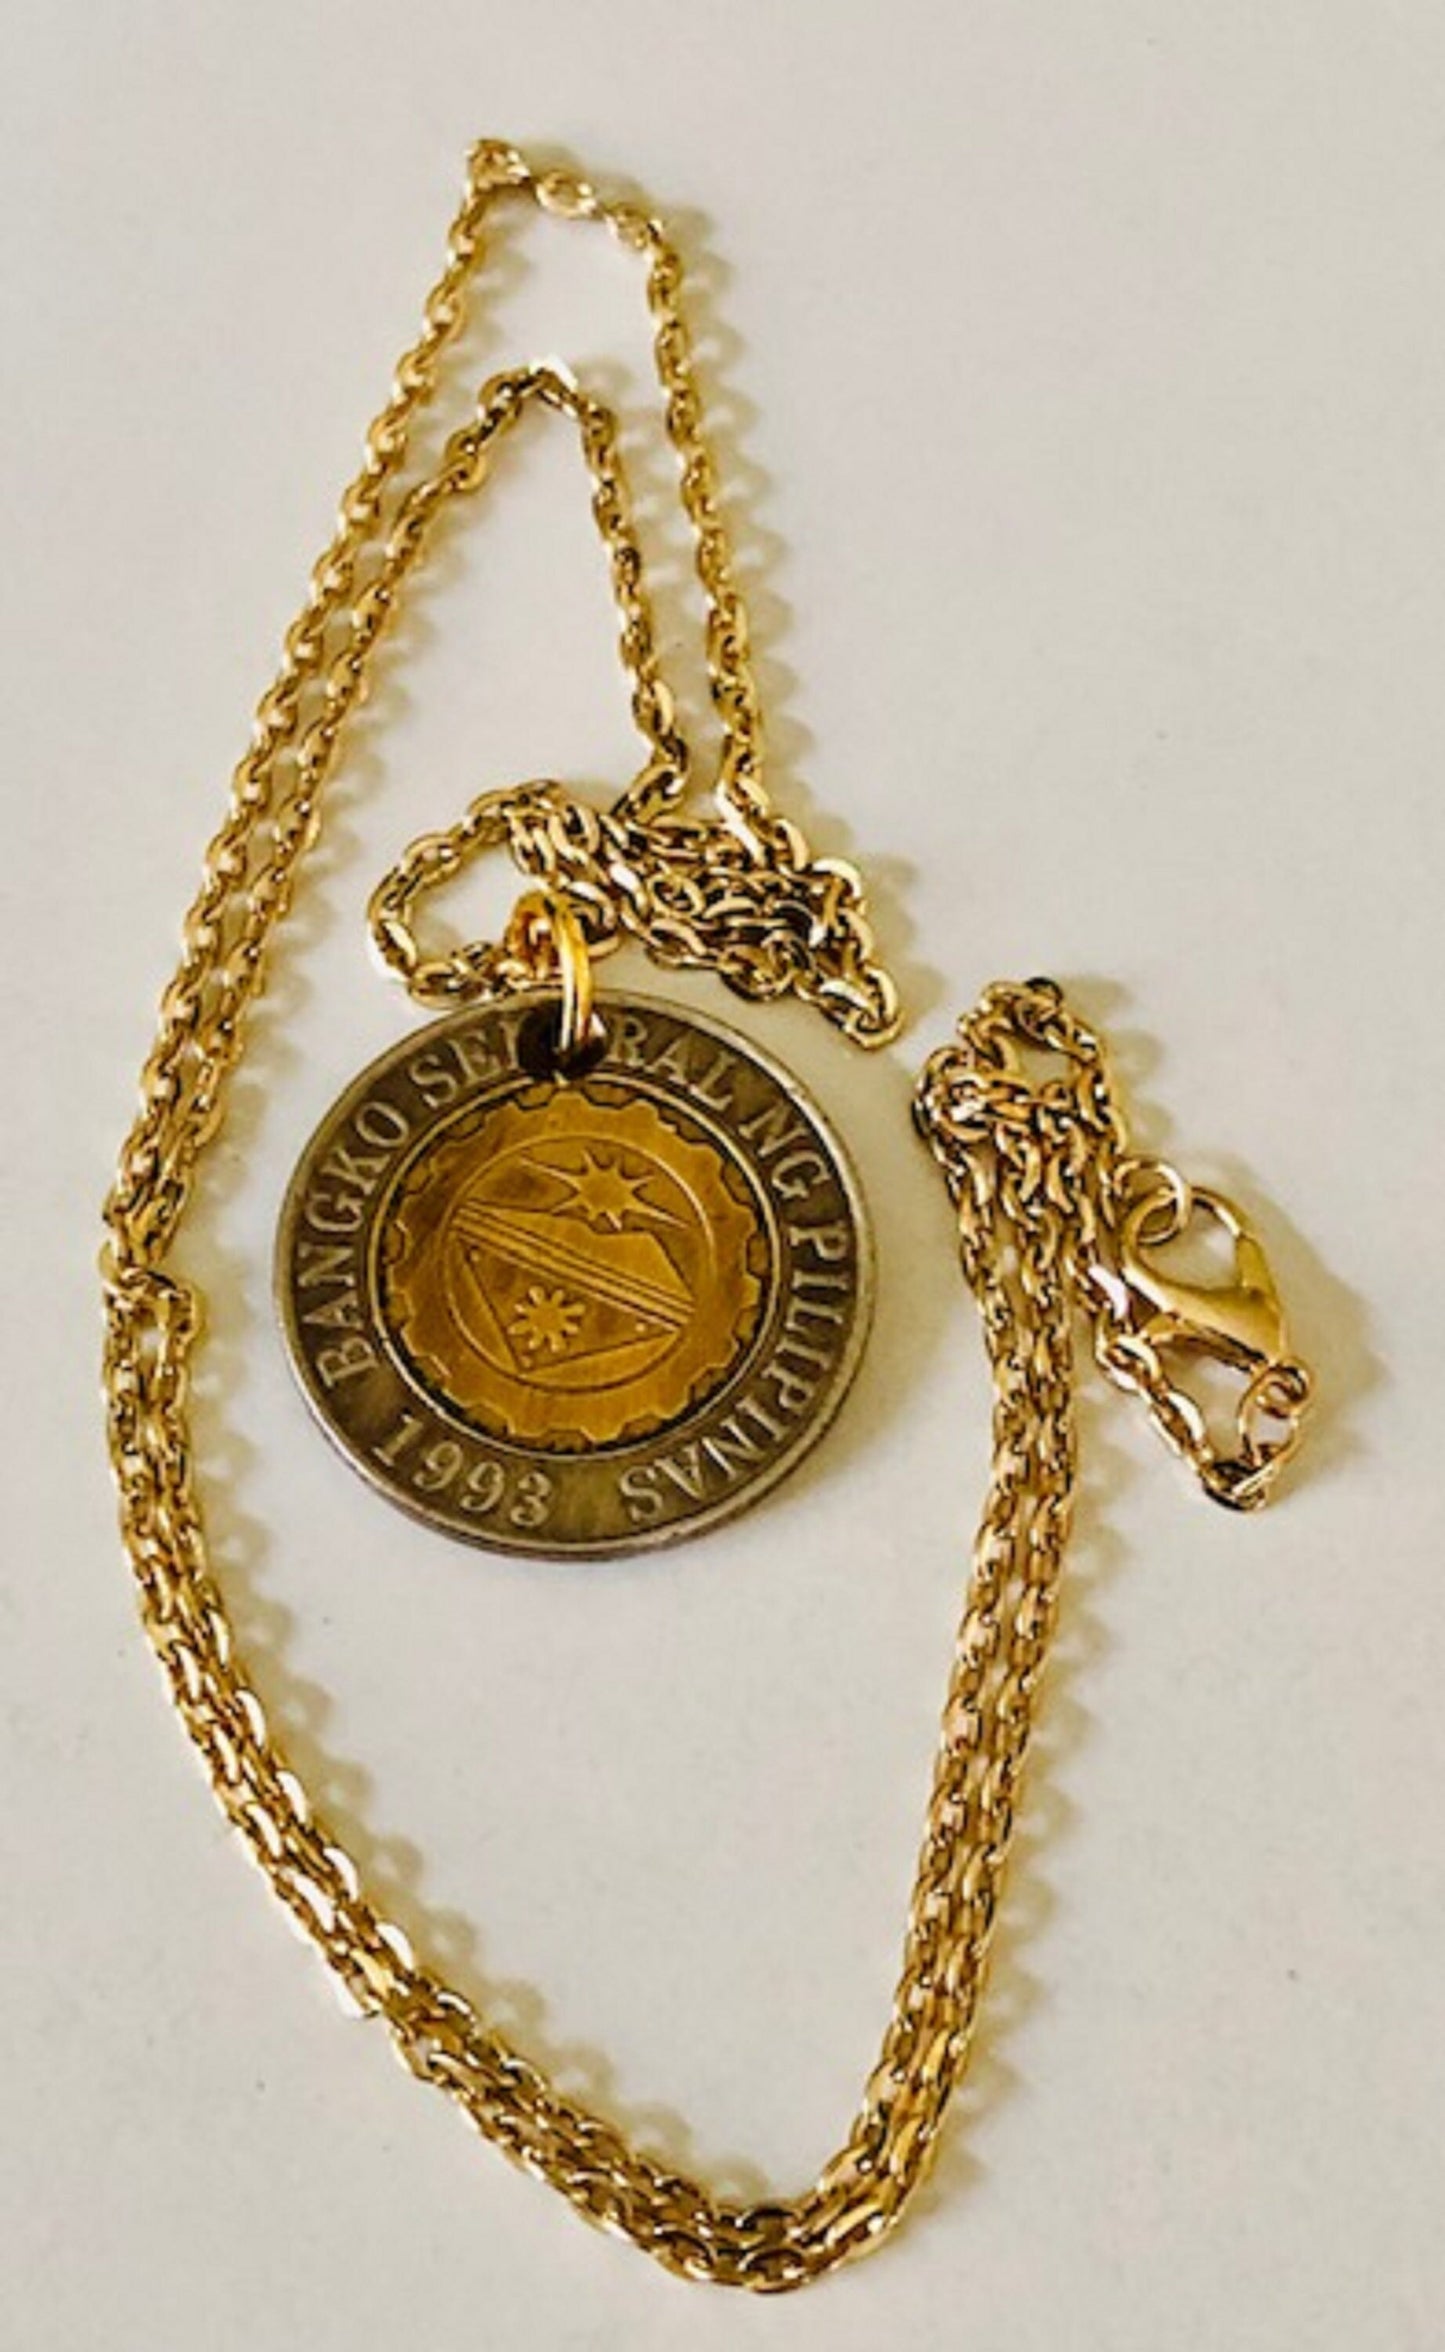 Philippines Coin Necklace Pendant Philippians 10 Piso Personal Vintage Handmade Jewelry Gift Friend Charm For Him Her World Coin Collector